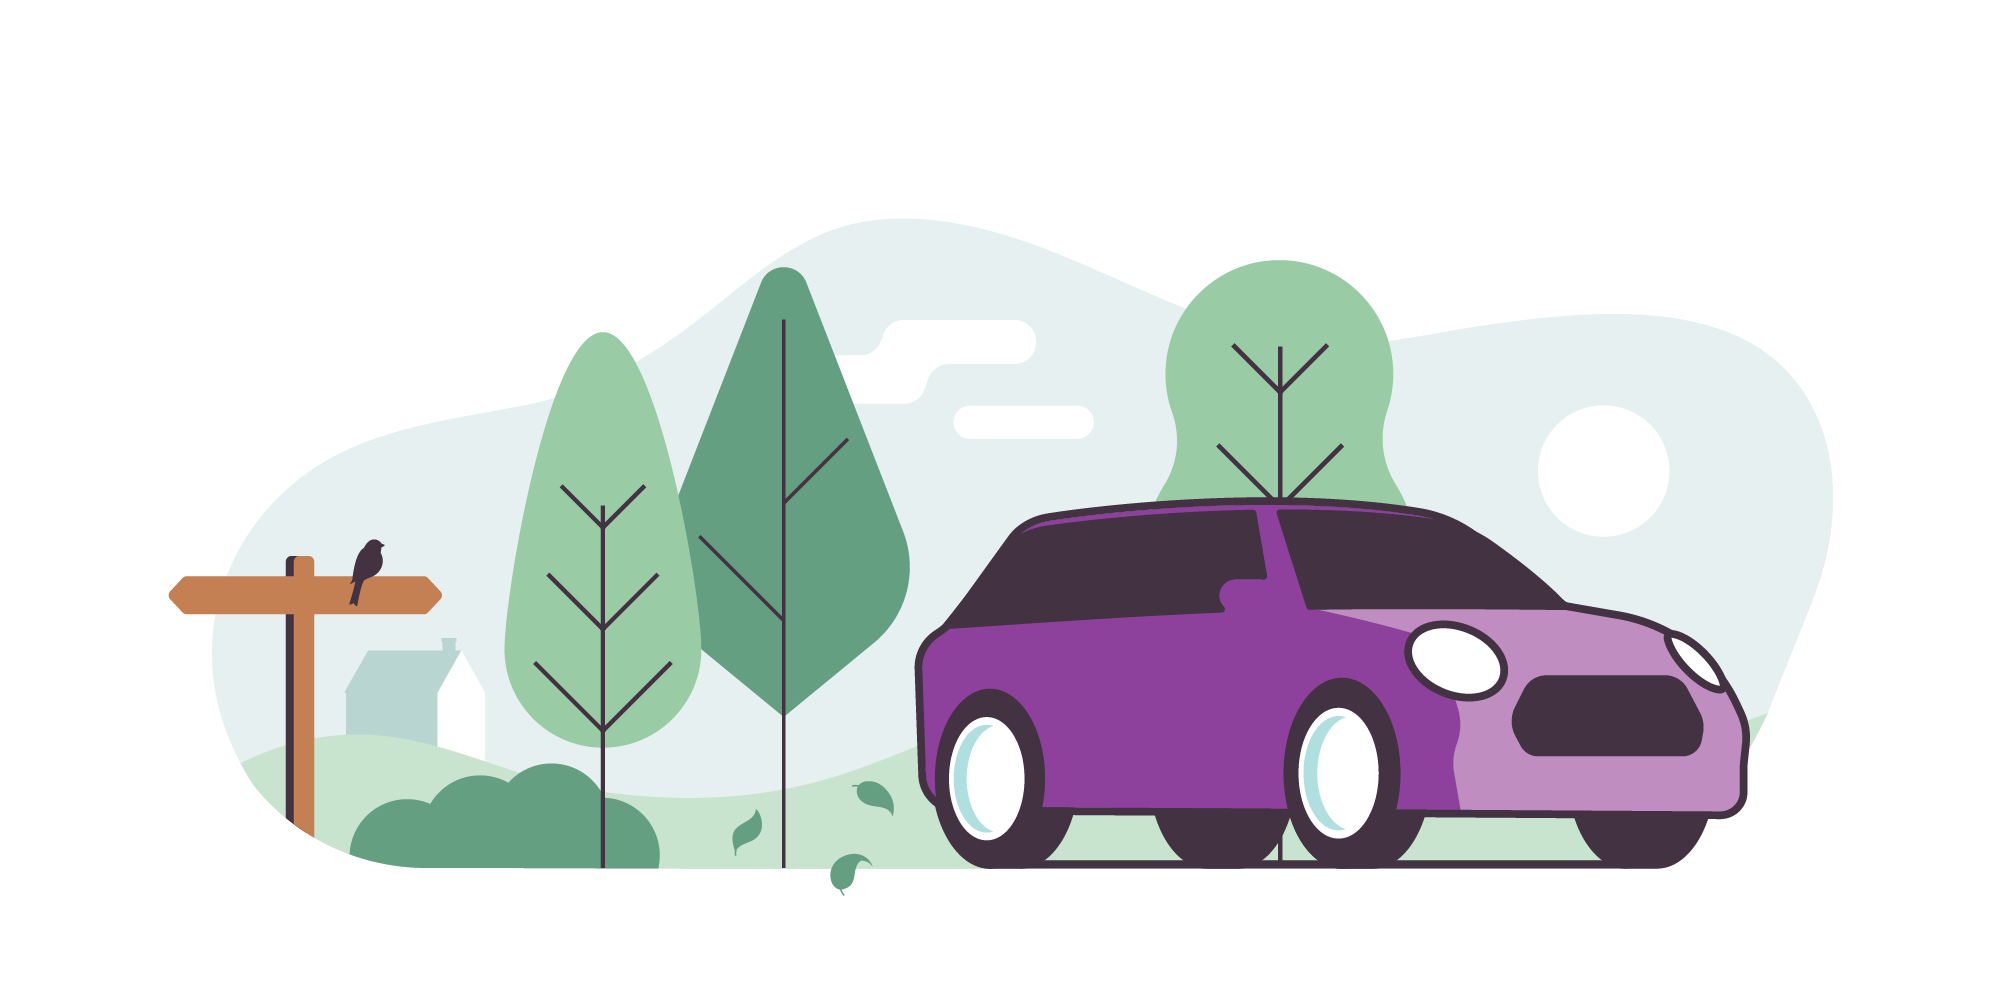 Illustration of a purple car, with trees and hedges